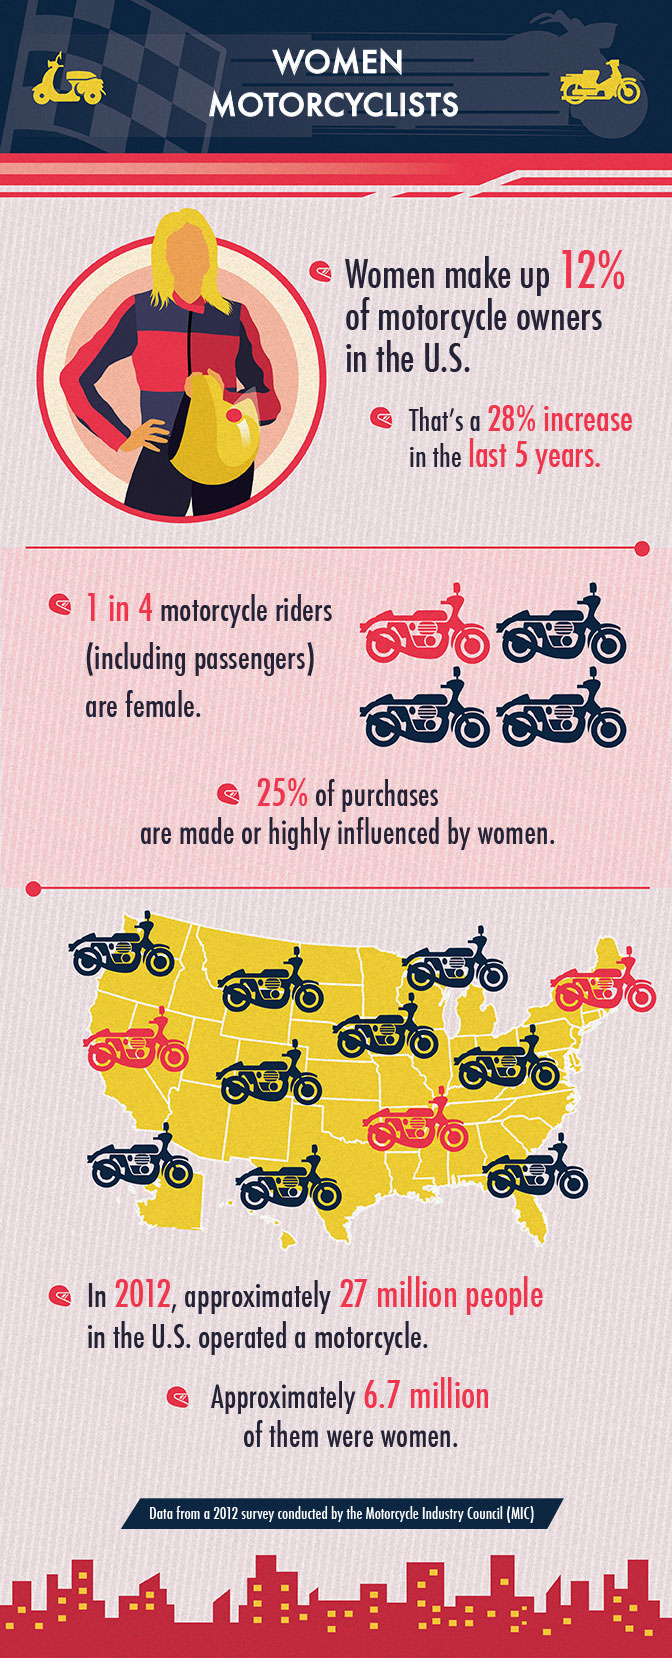 women-motorcyclists-infographic